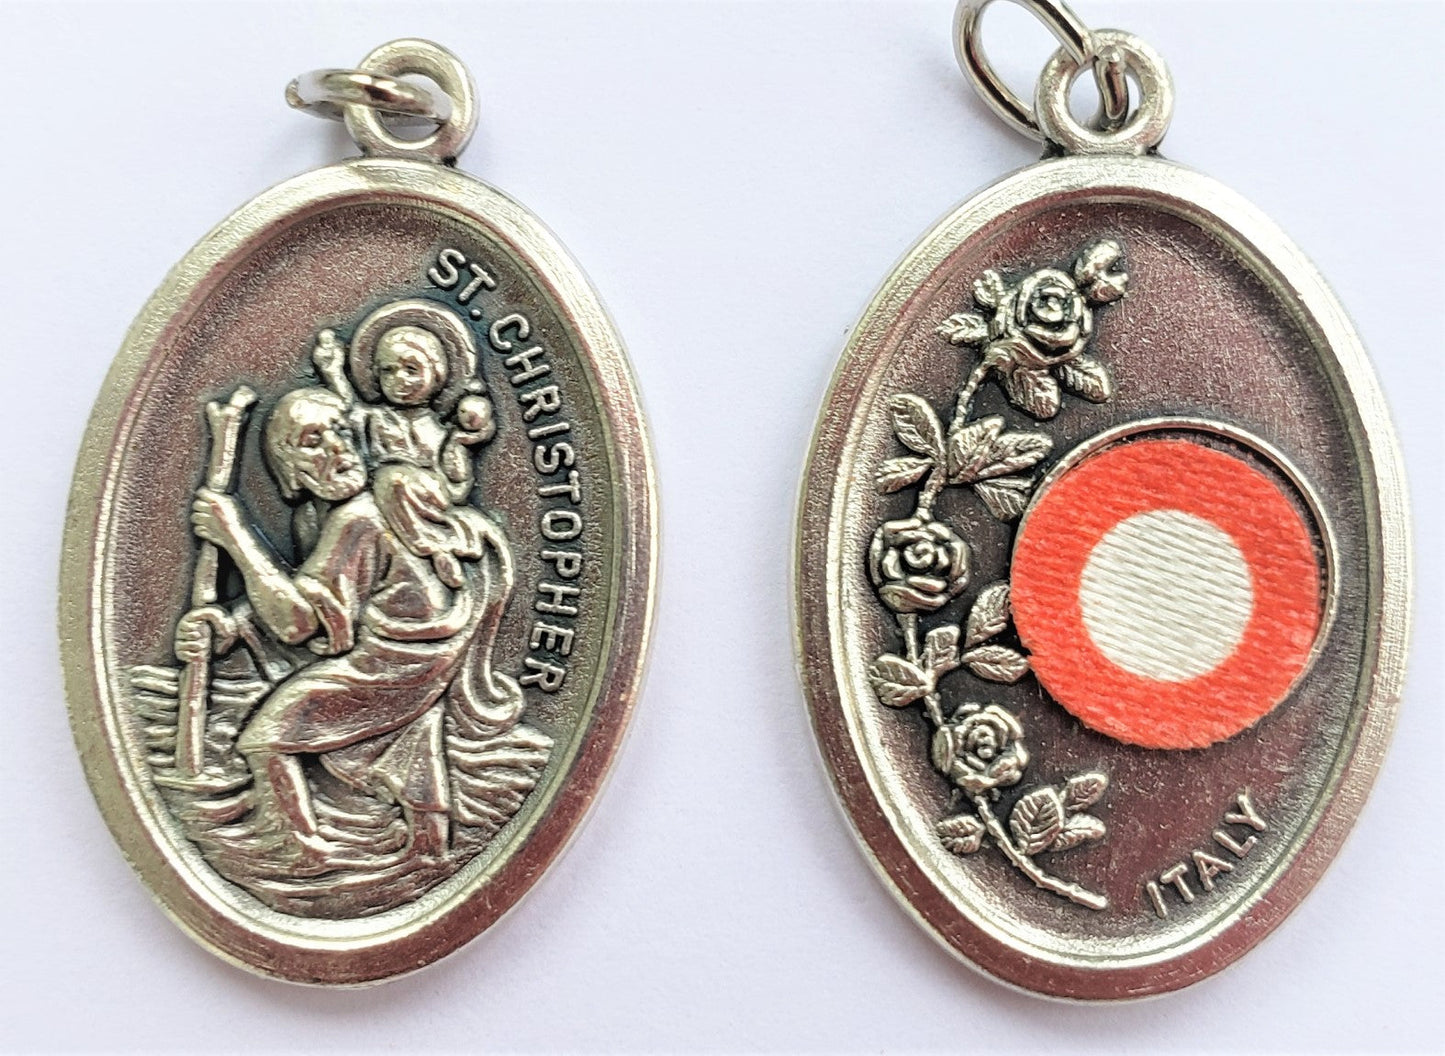 St. Christopher Relic Medal